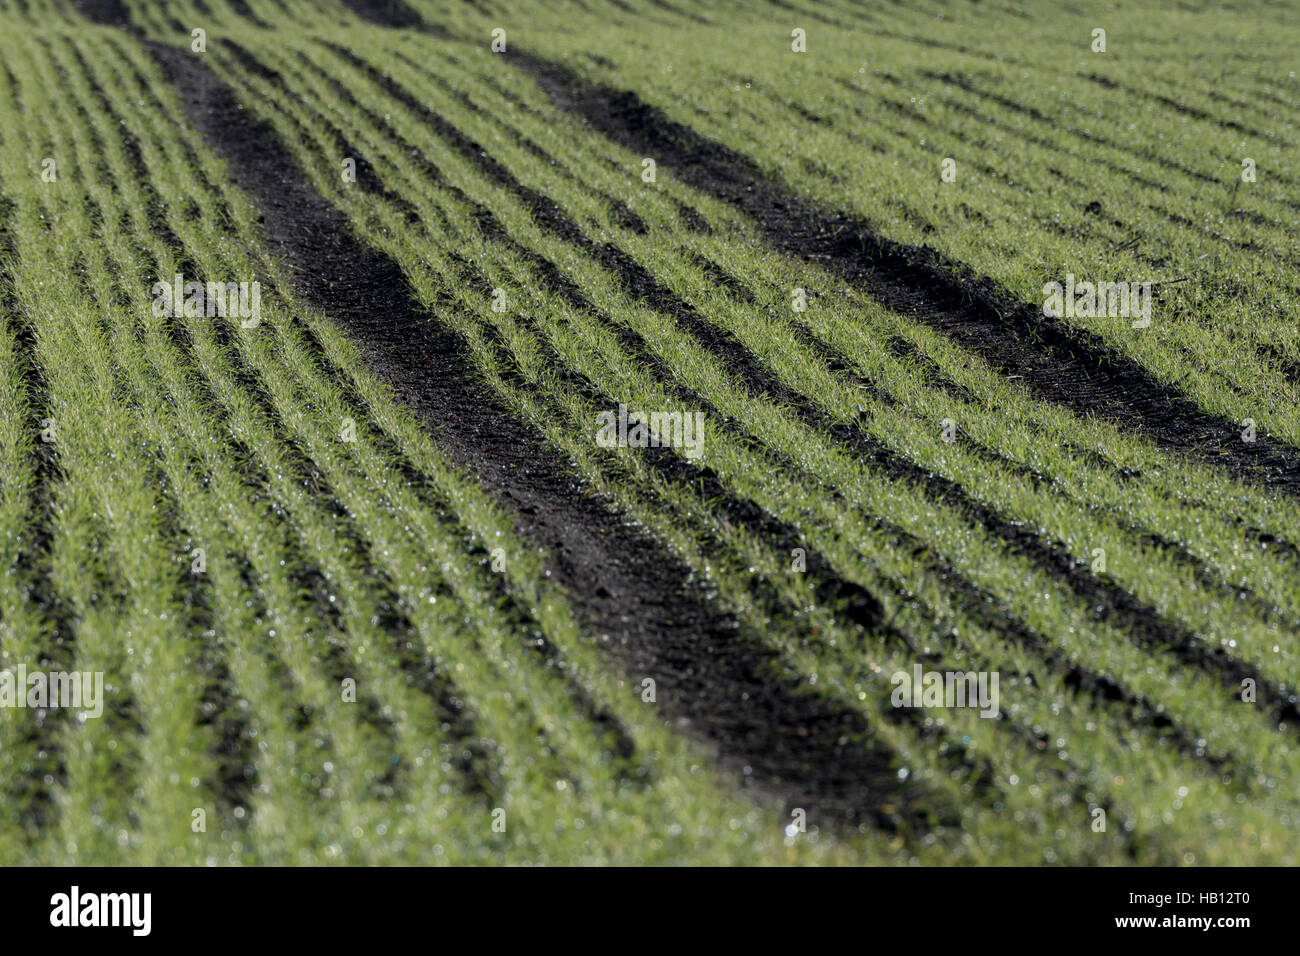 Sprouting winter wheat, or other cereal crop. Possible GM concept. Metaphor for food security / growing food. Field crop pattern. Stock Photo